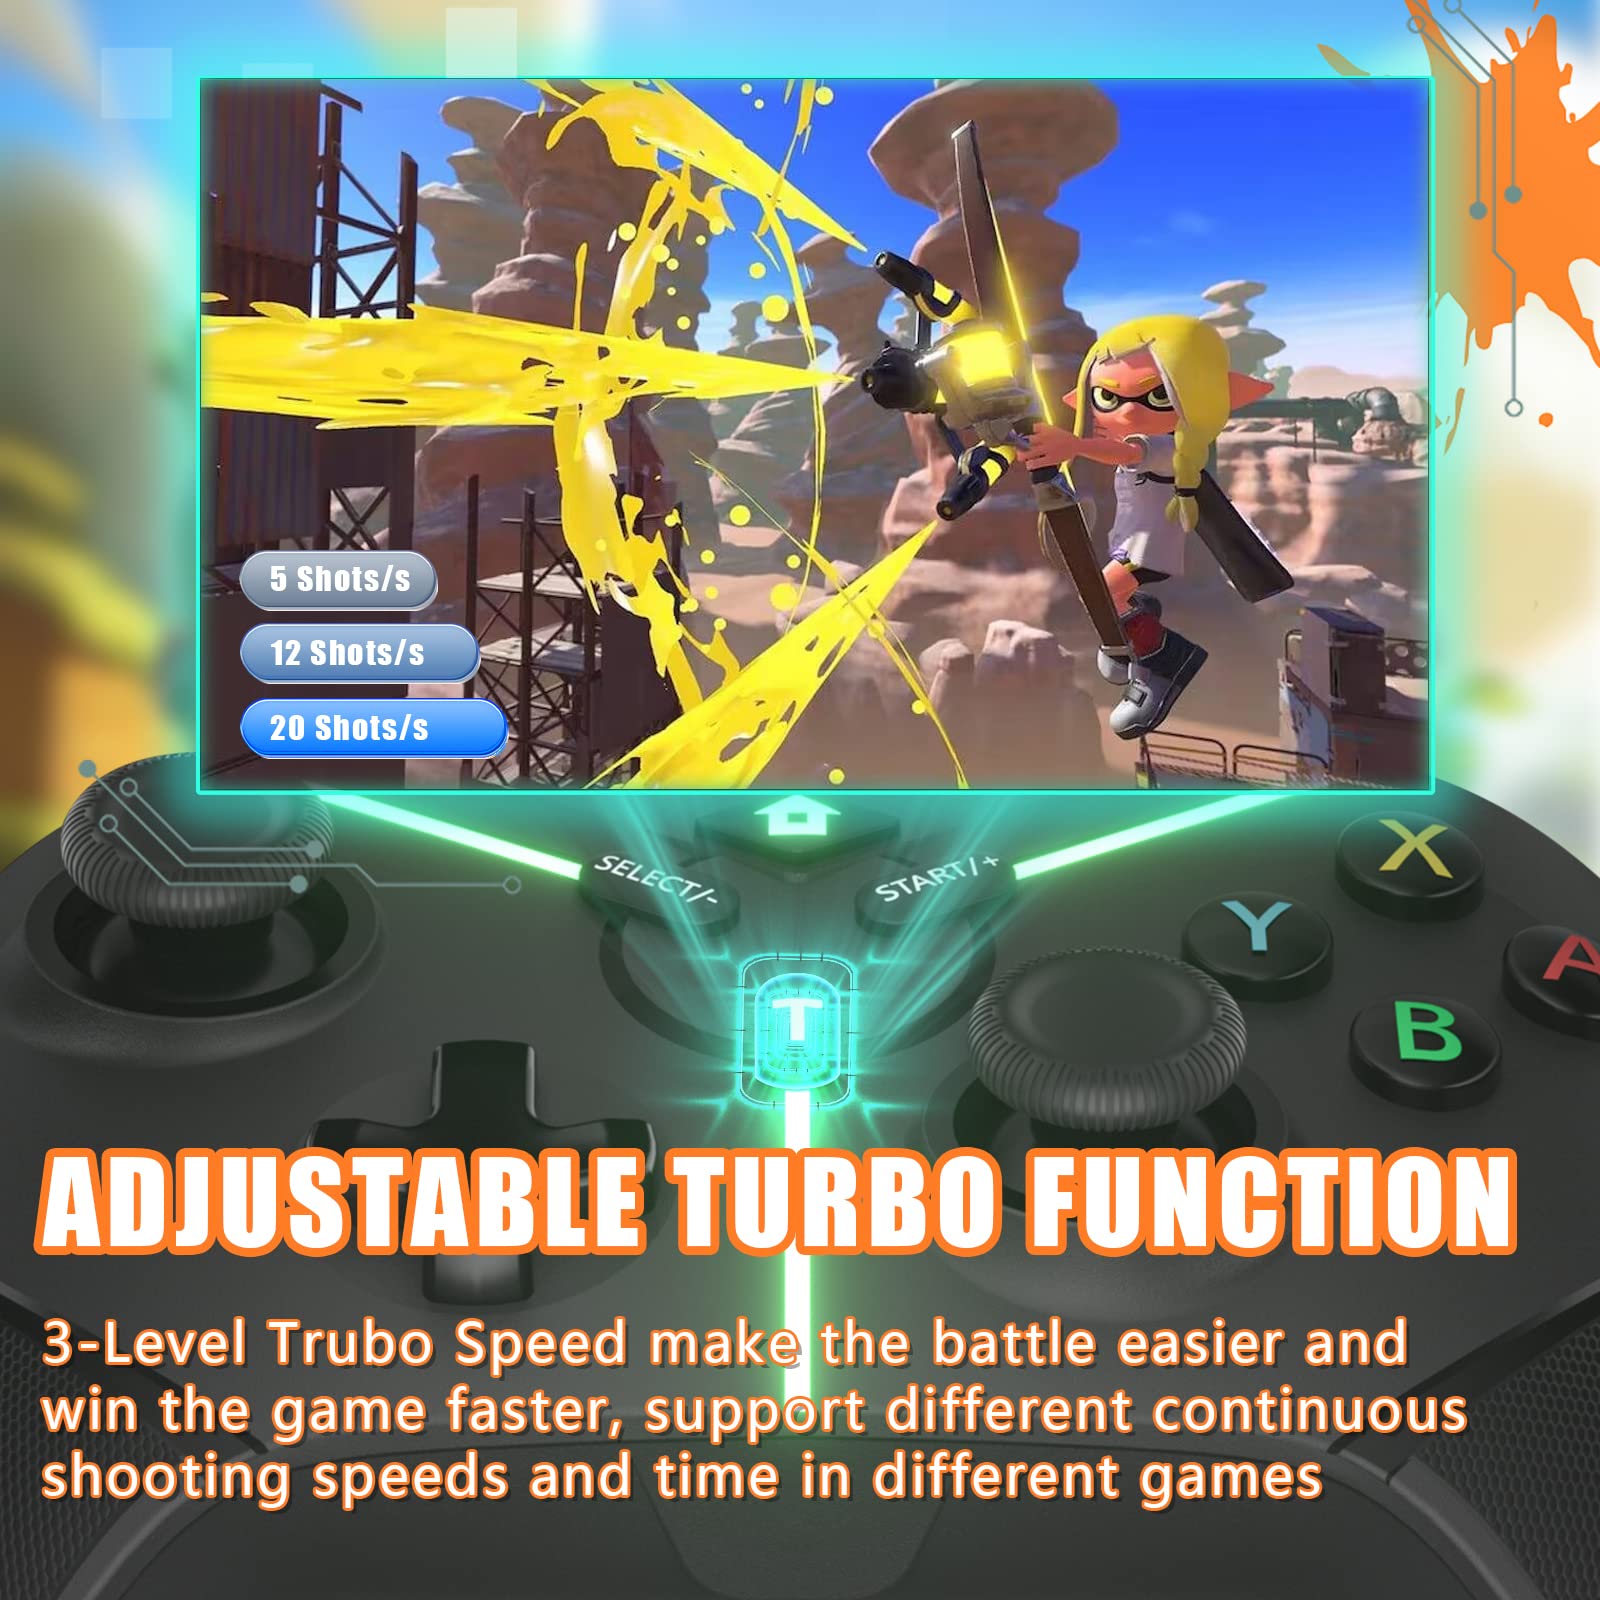 Switch Controllers, Wireless Switch Pro Controller Compatible with Nintendo Switch/Lite/OLED, Switch Remote Gamepad with Motion Control, Wake-up, Programmable, Screenshot, Ergonomic Non-Slip, Adjustable Turbo & Dual Vibration